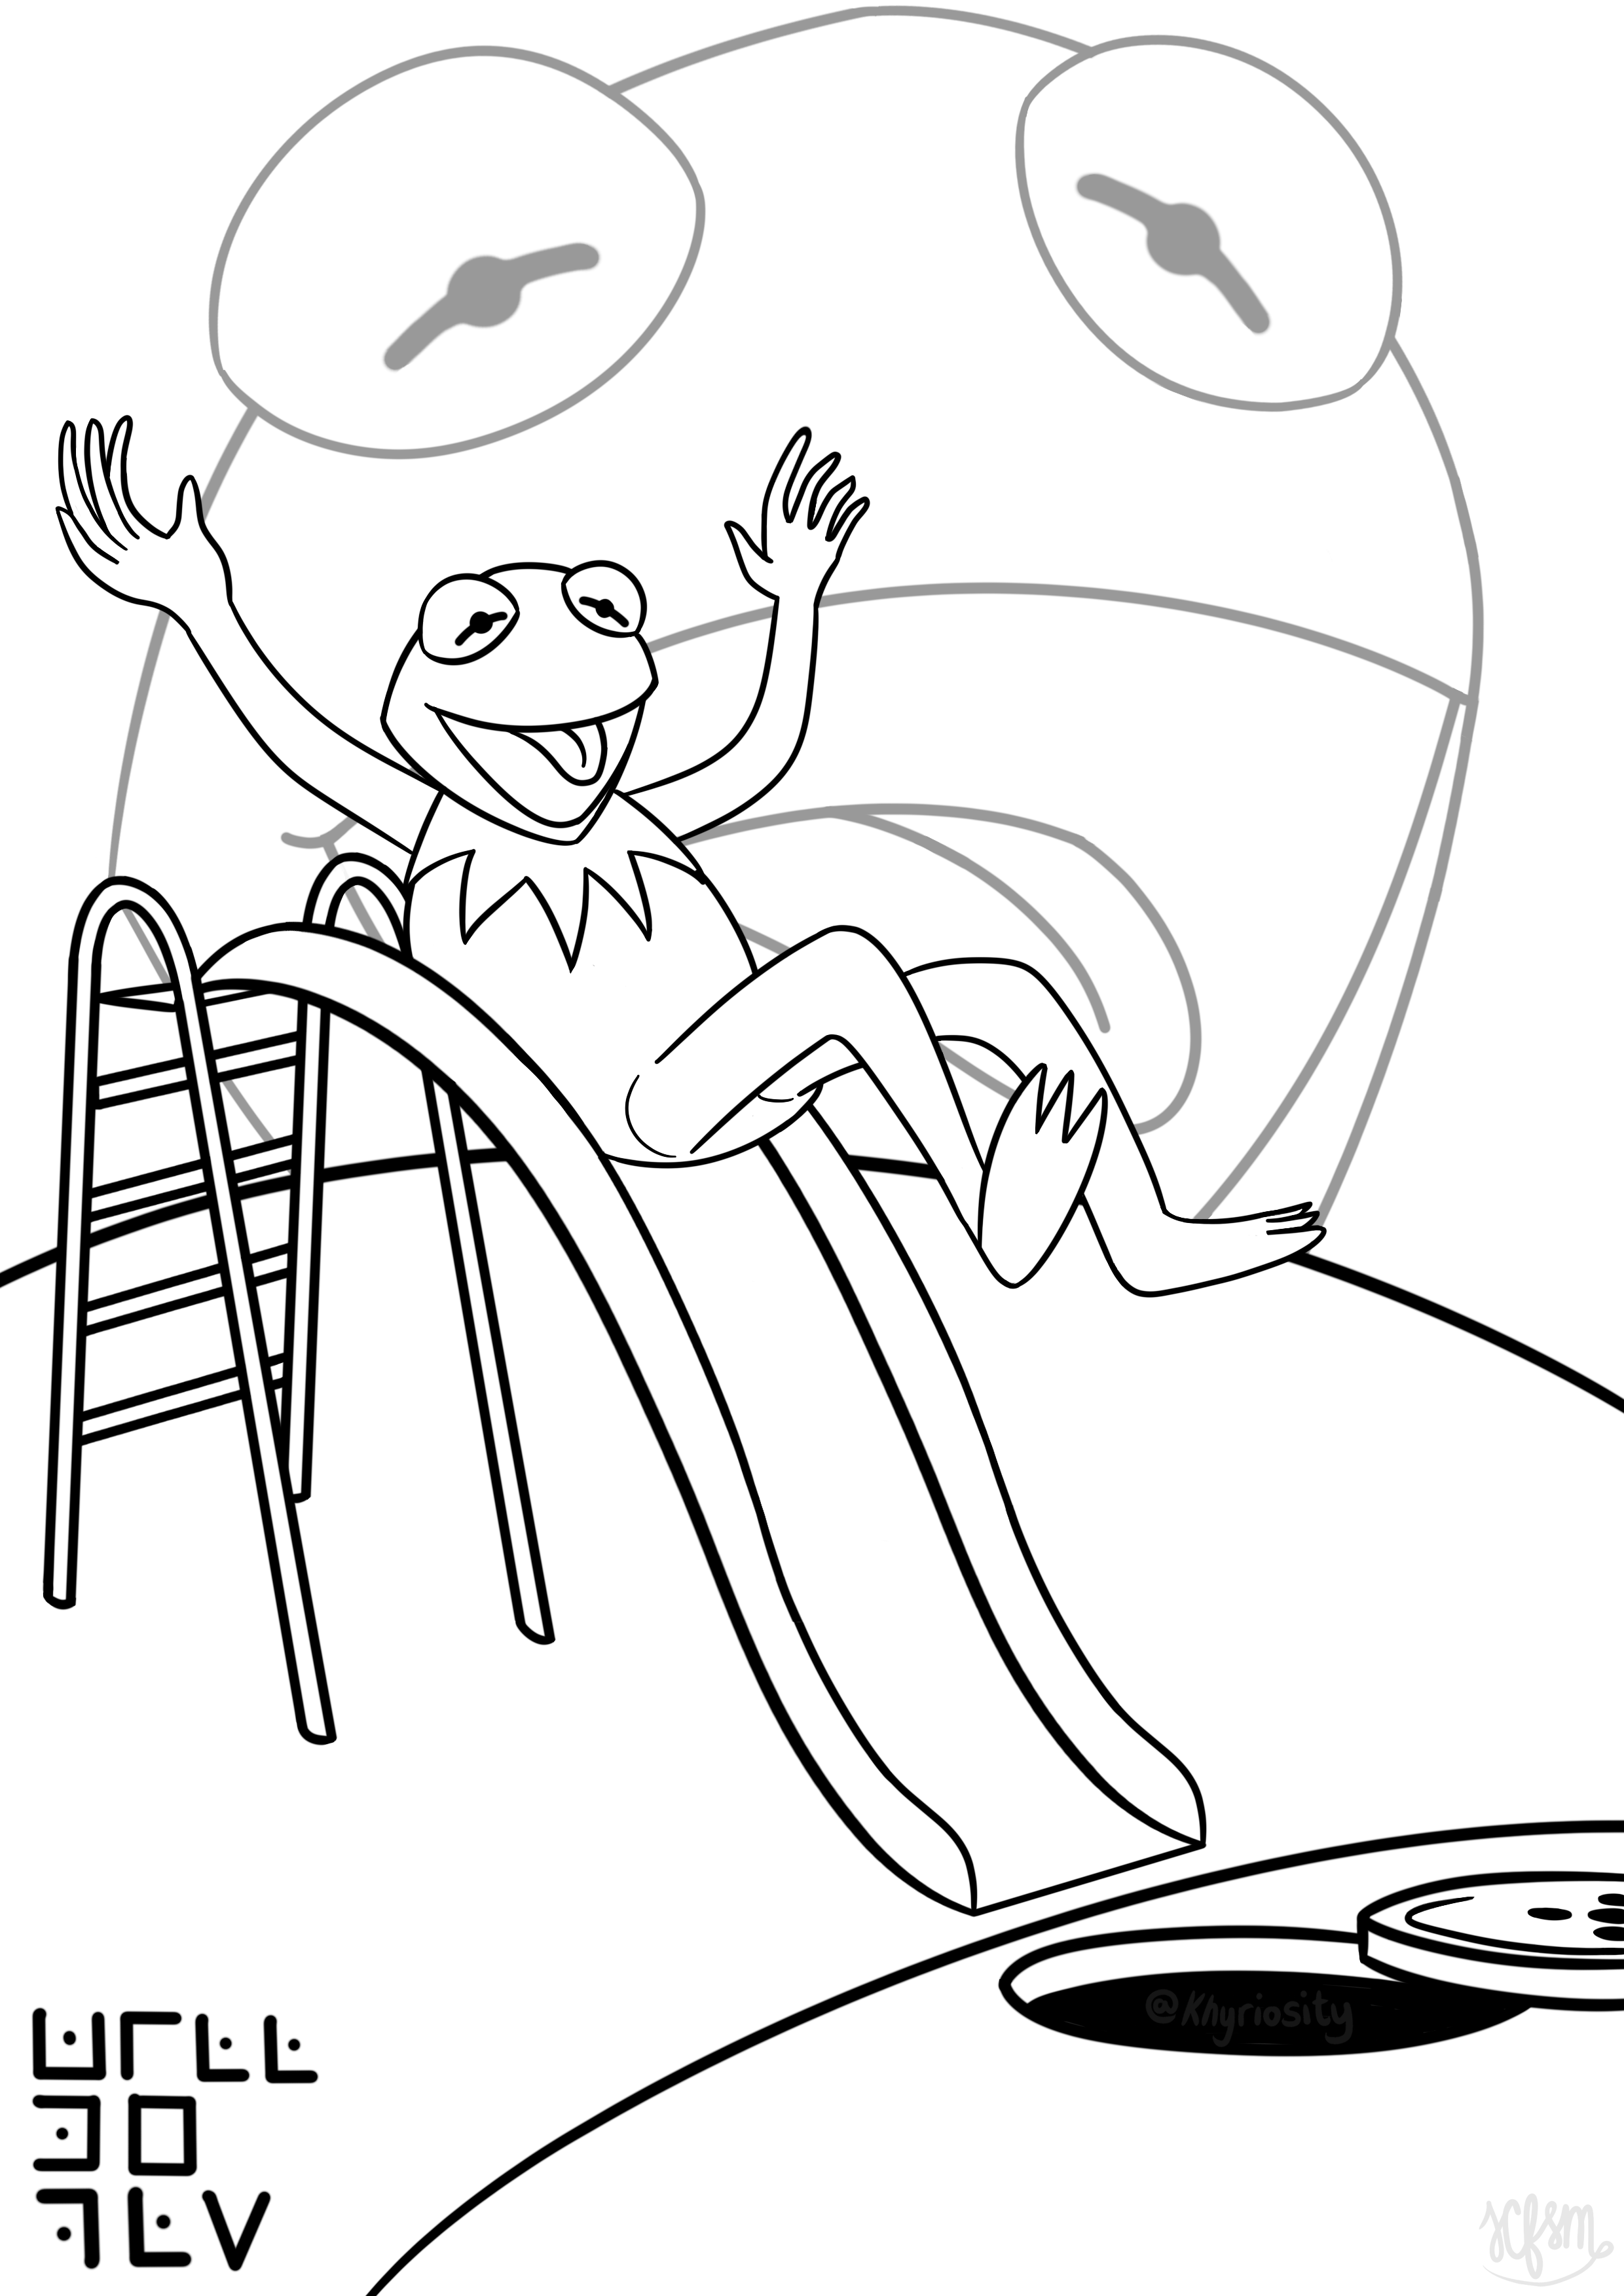 My drawing of kermit sewer slide if it was a coloring book page rkermit